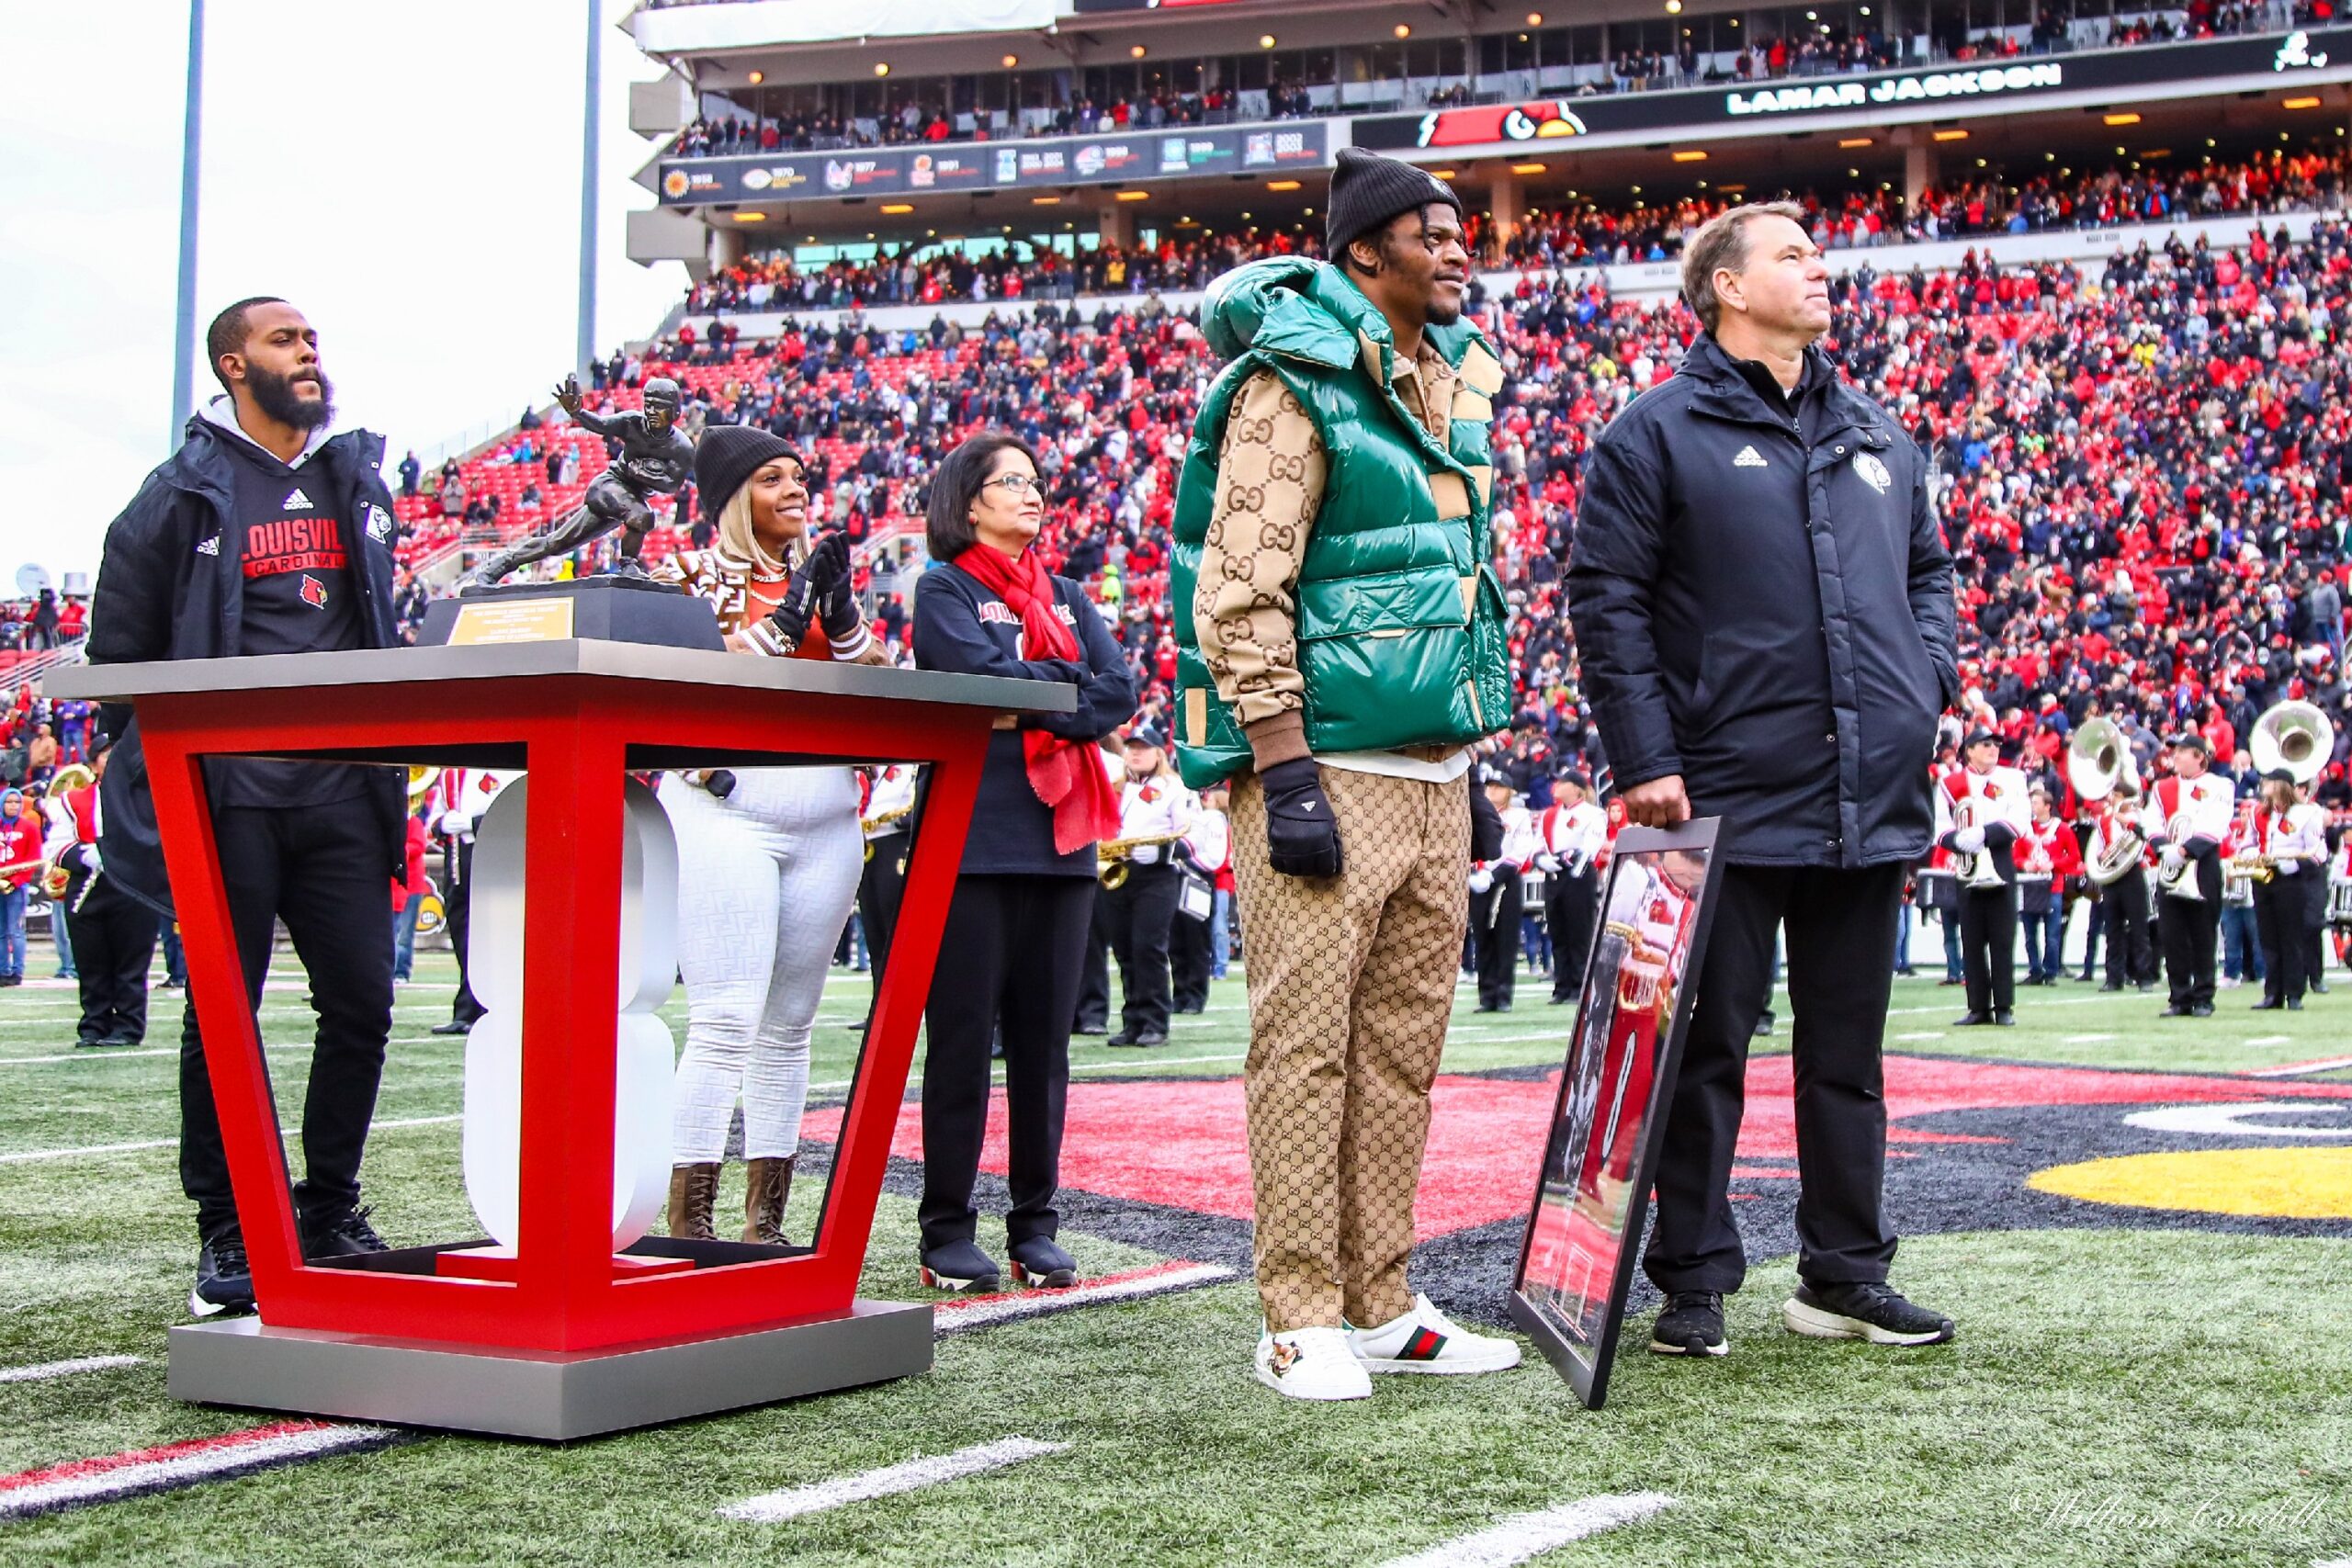 GALLERY: Lamar Jackson Jersey/Number Retirement Ceremony – The Crunch Zone